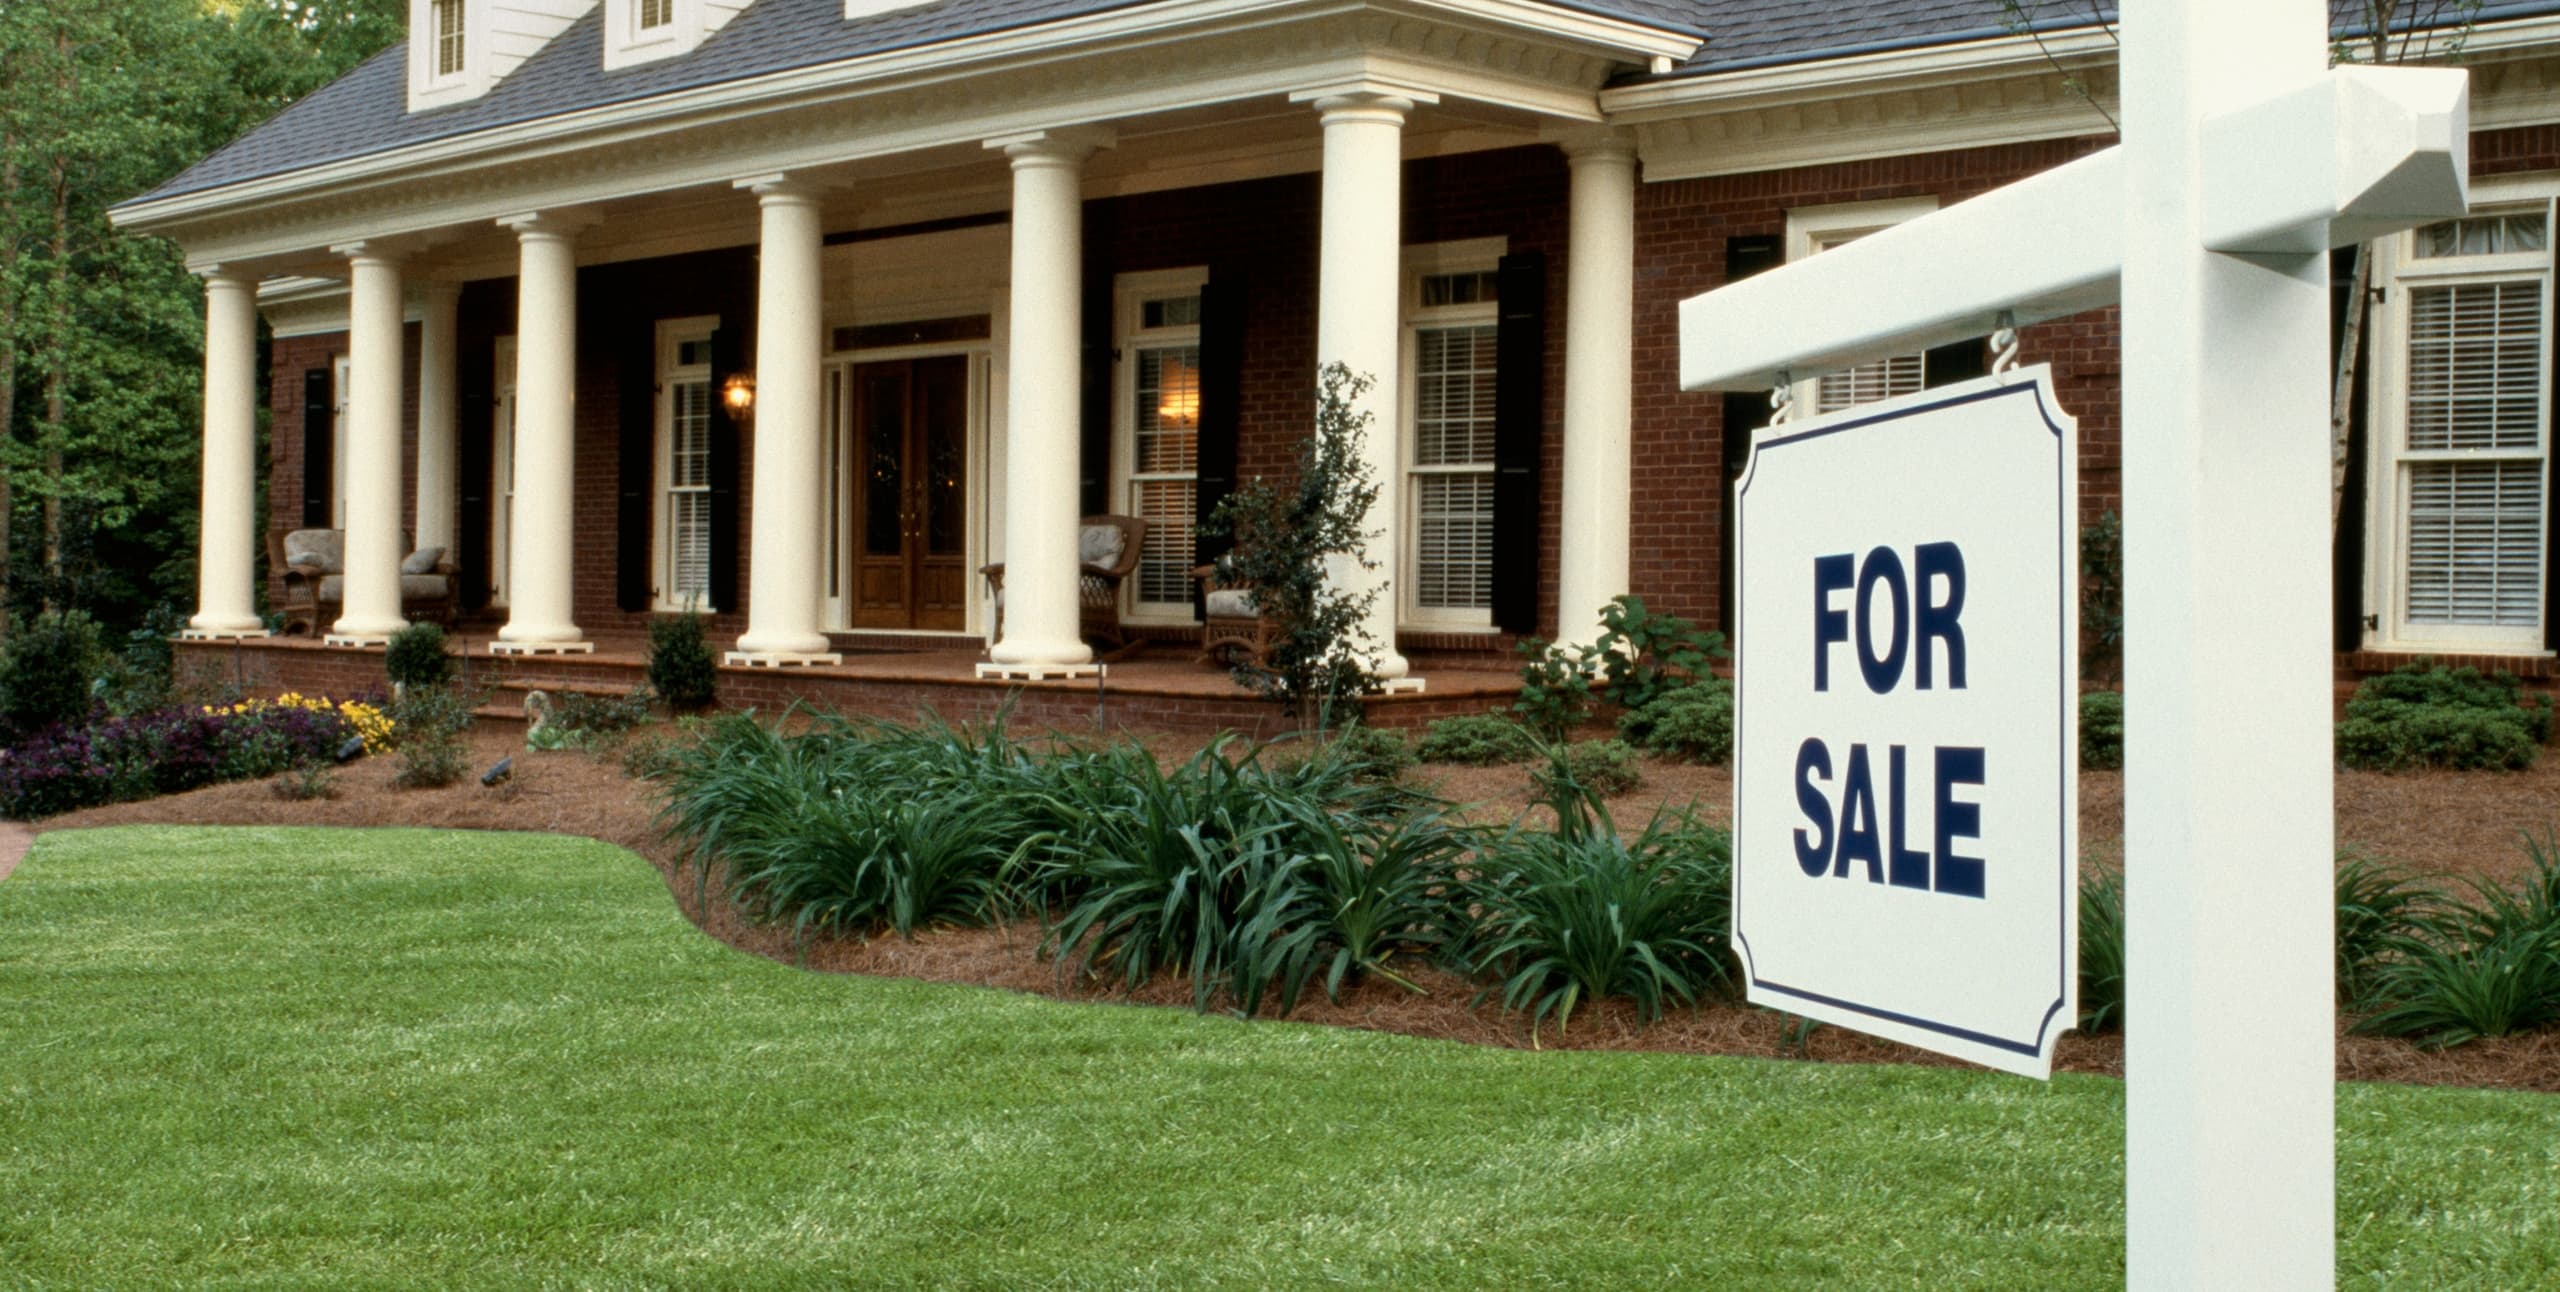 for sale sign placed in front of brick house